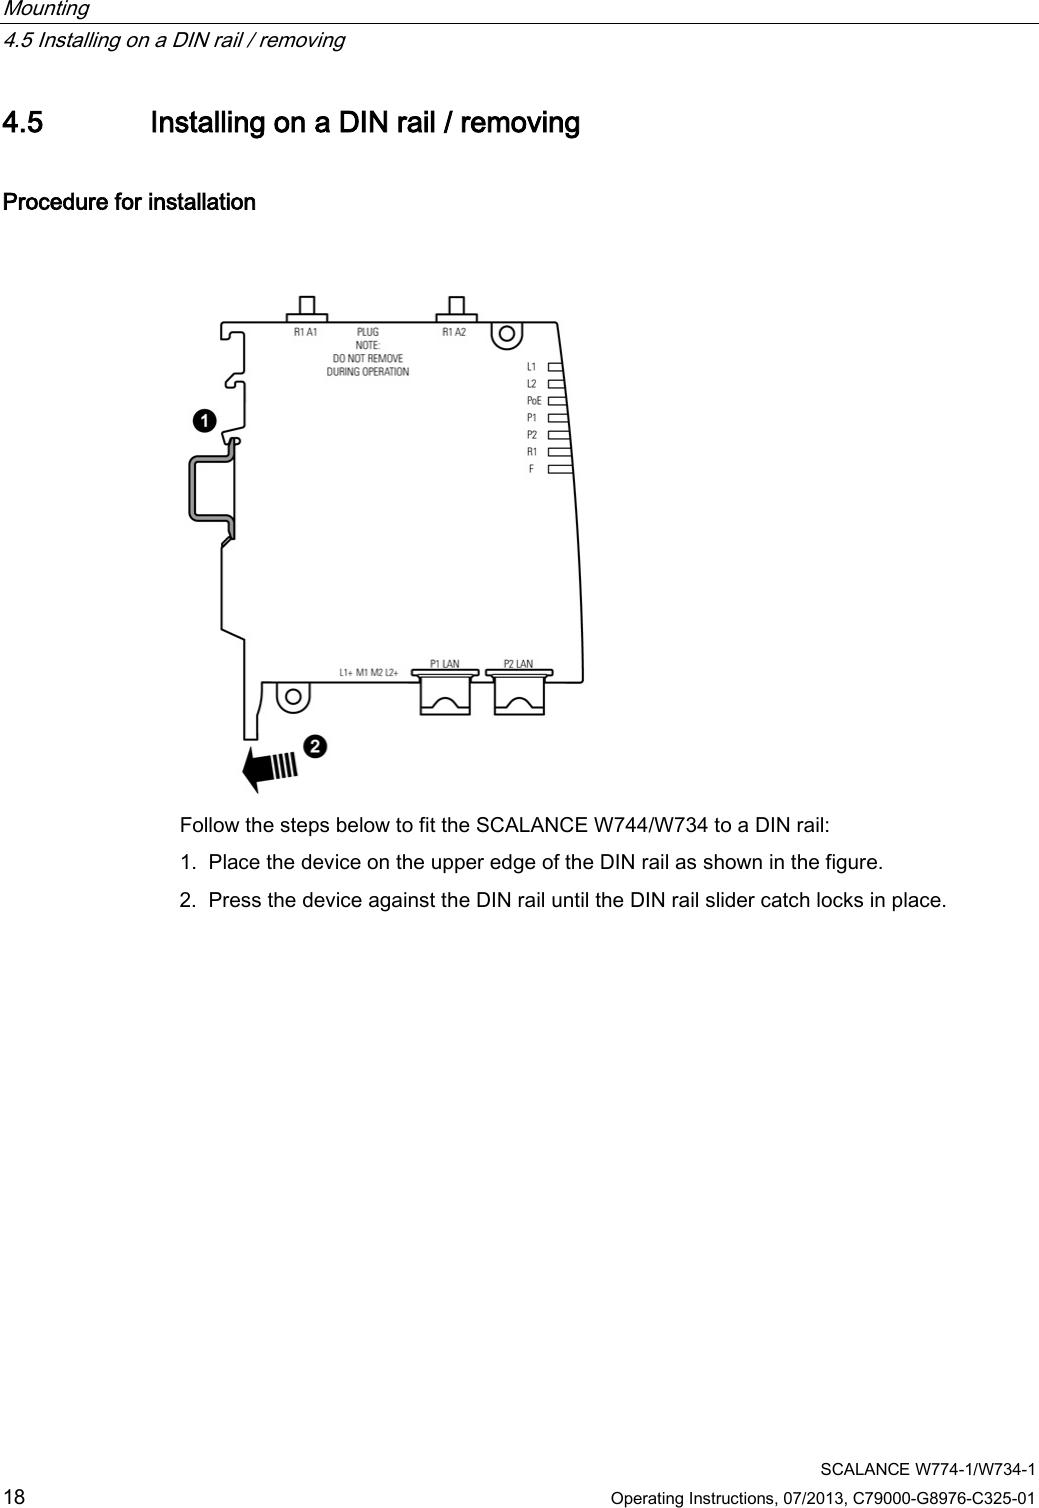 Mounting   4.5 Installing on a DIN rail / removing  SCALANCE W774-1/W734-1 18 Operating Instructions, 07/2013, C79000-G8976-C325-01 4.5 Installing on a DIN rail / removing Procedure for installation  Follow the steps below to fit the SCALANCE W744/W734 to a DIN rail: 1. Place the device on the upper edge of the DIN rail as shown in the figure. 2. Press the device against the DIN rail until the DIN rail slider catch locks in place. 